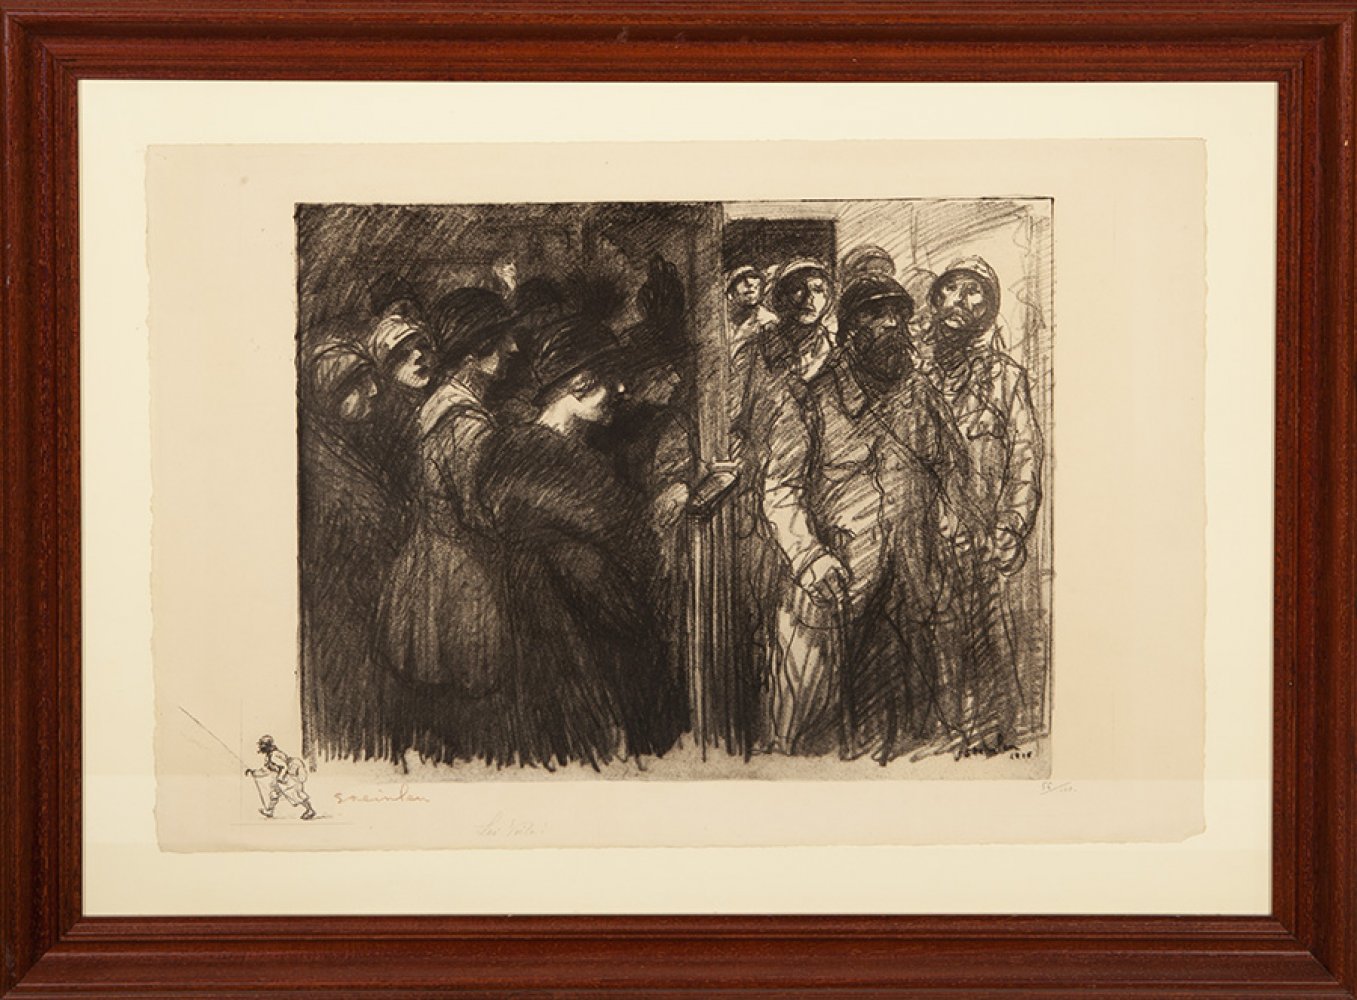 THÉOPHILE ALEXANDRE STEINLEN (Switzerland, 1859-France, 1923).Untitled.Lithograph on paper. Copy - Image 5 of 5